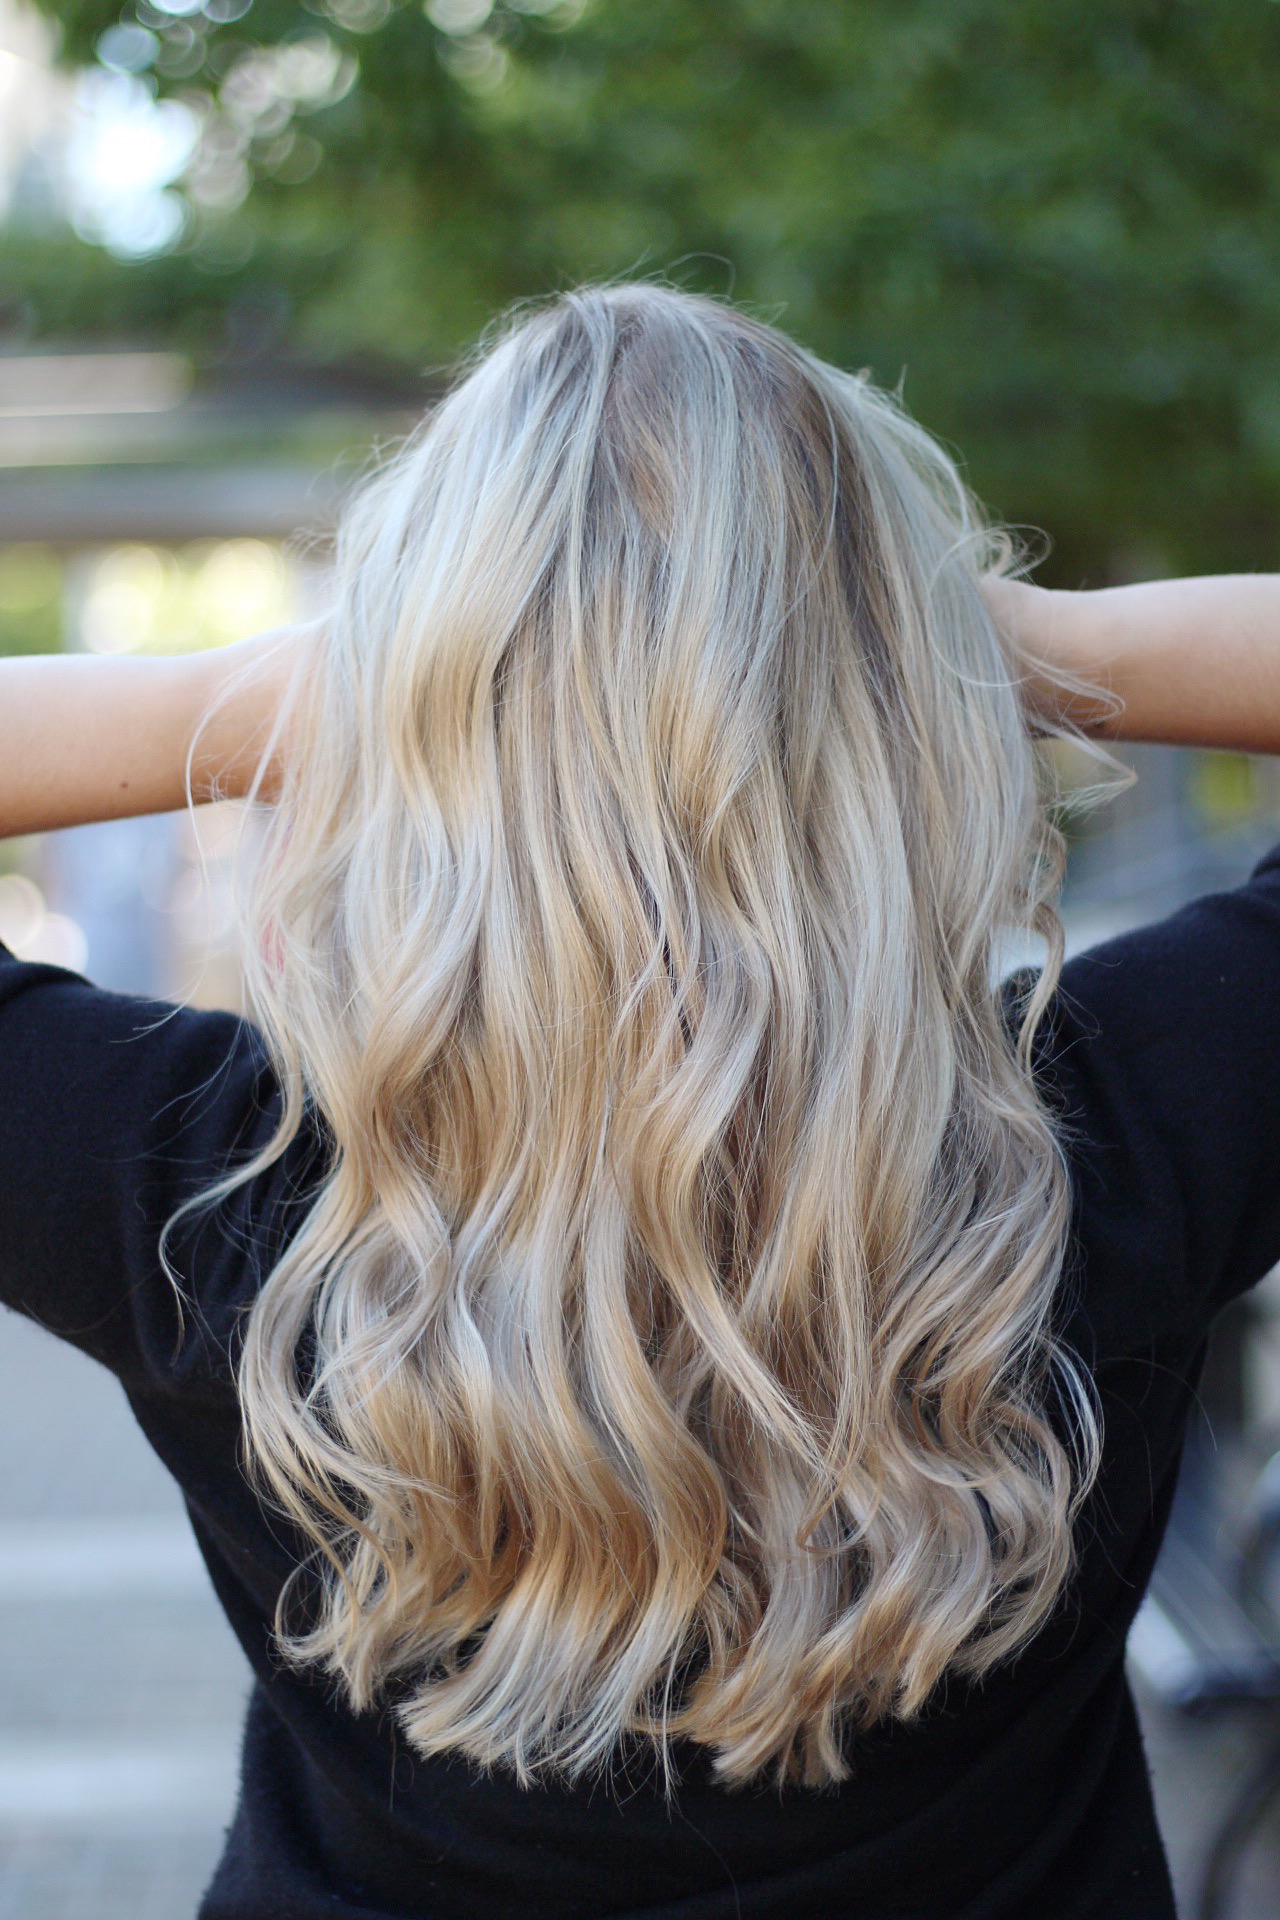 5 things to know about going blonde